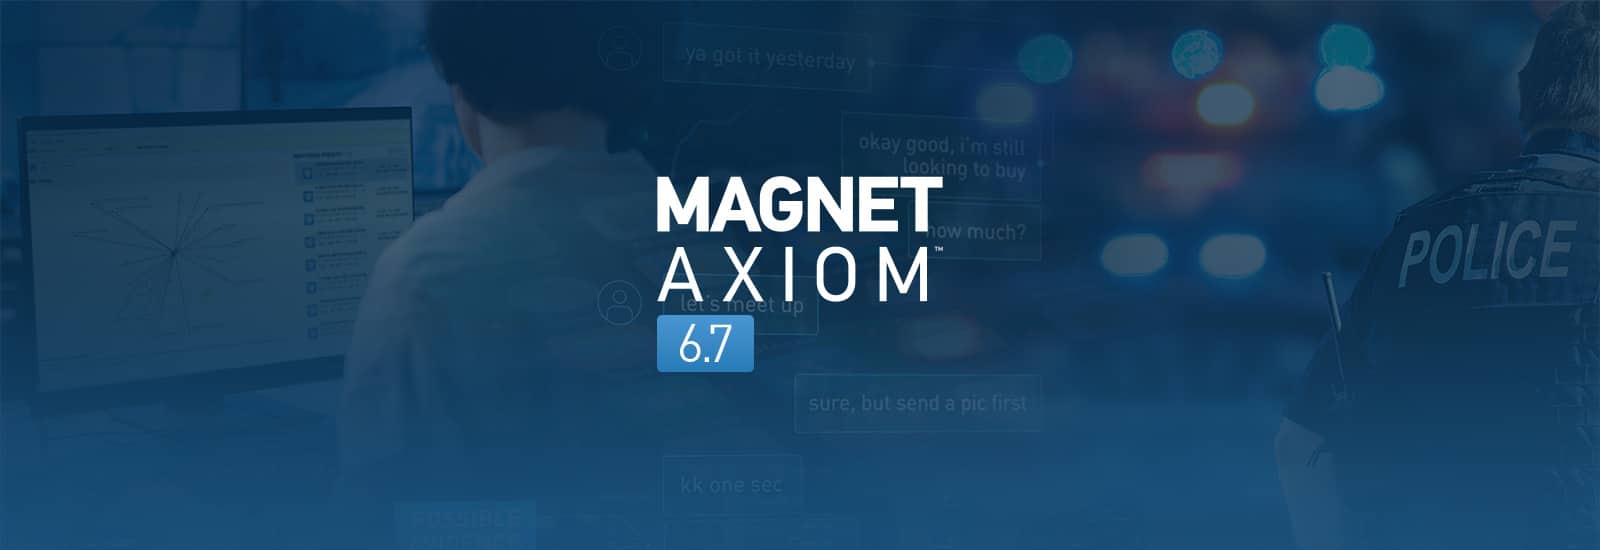 A decorative header for the Magnet AXIOM 6.7 release